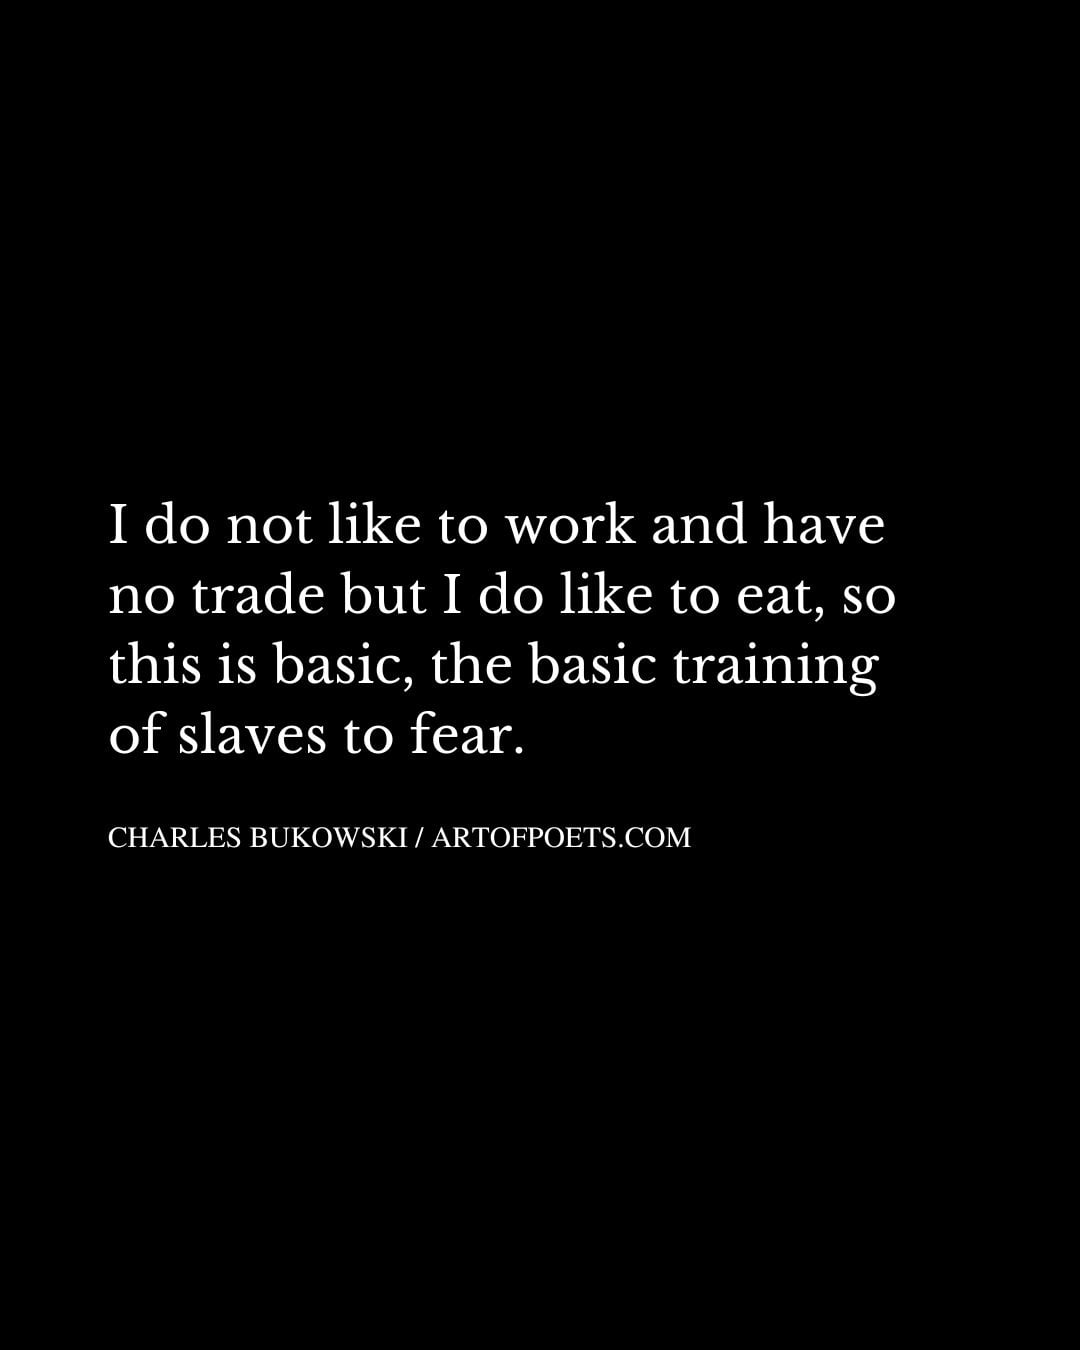 I do not like to work and have no trade but I do like to eat so this is basic the basic training of slaves to fear